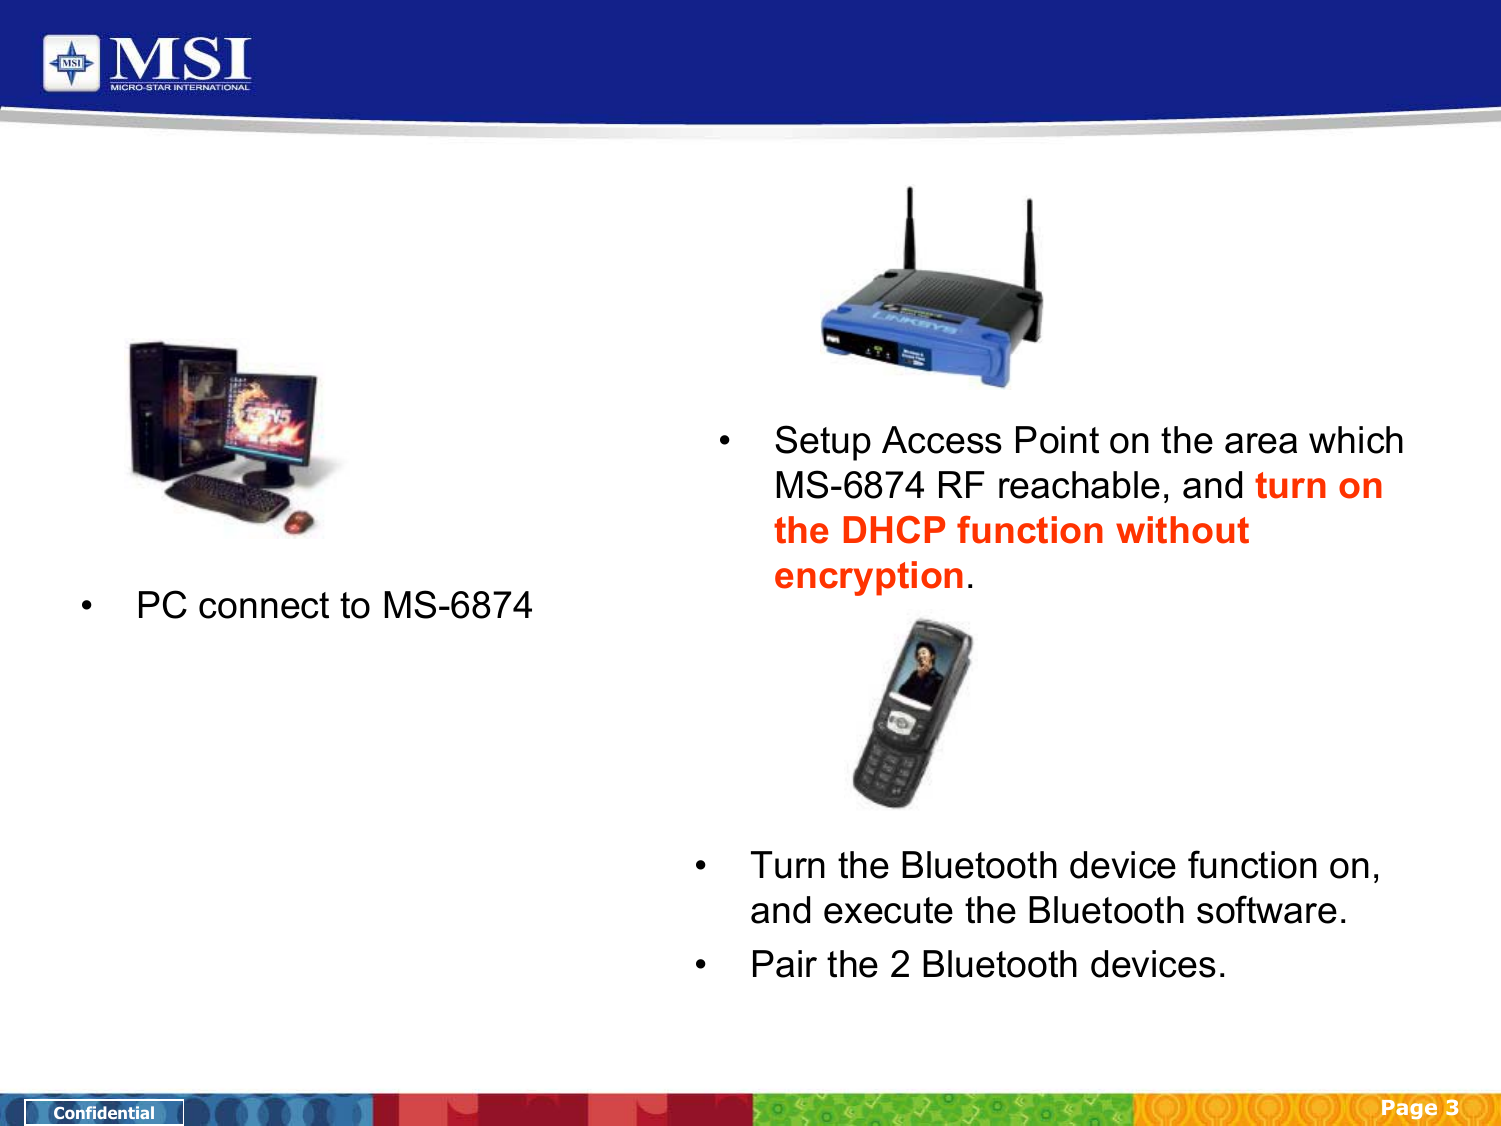 Page 3Confidential• PC connect to MS-6874• Setup Access Point on the area which MS-6874 RF reachable, and turn on the DHCP function without encryption.• Turn the Bluetooth device function on, and execute the Bluetooth software.• Pair the 2 Bluetooth devices.